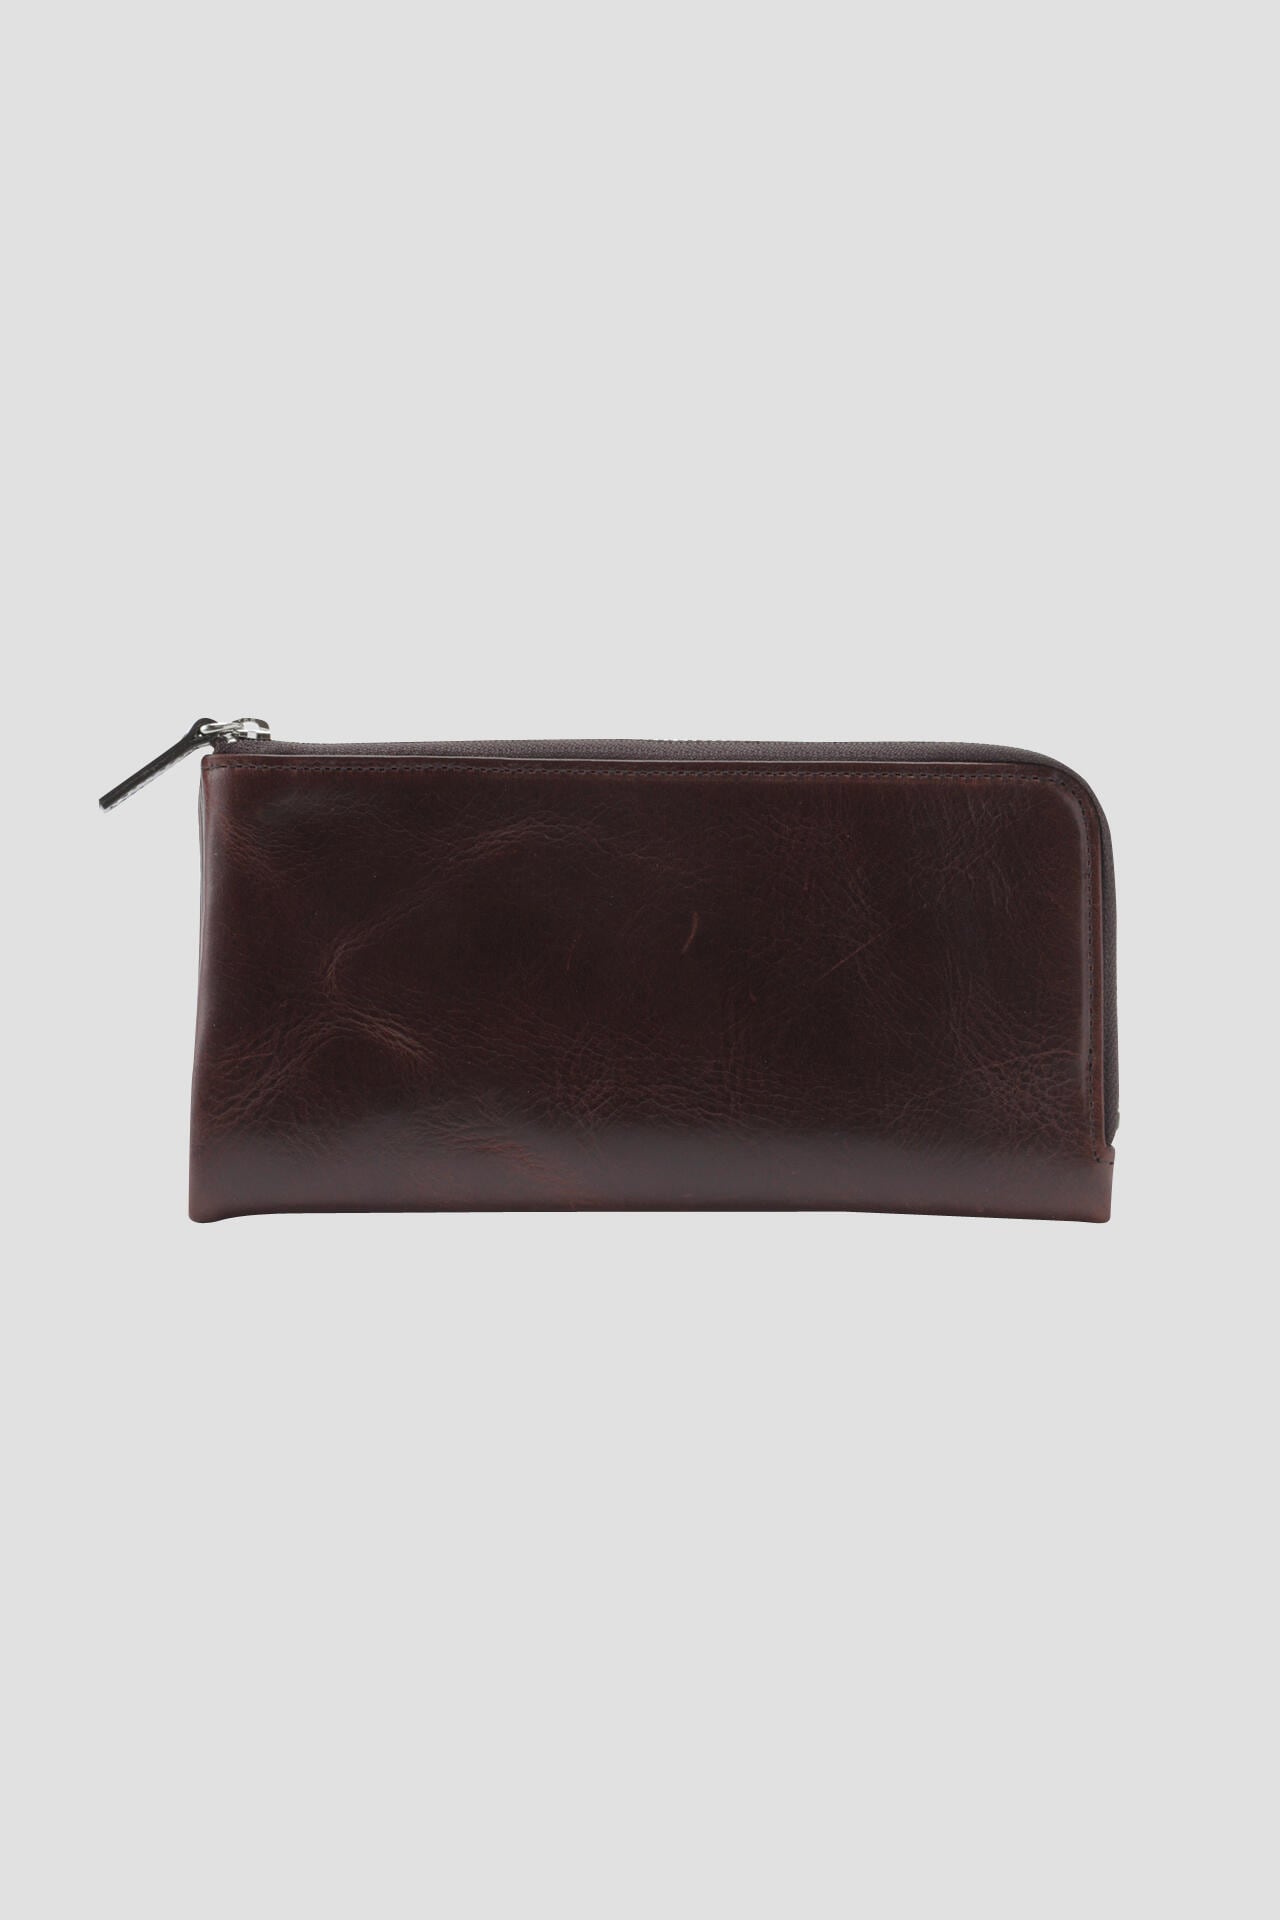 VEGETABLE TANNED LEATHER7